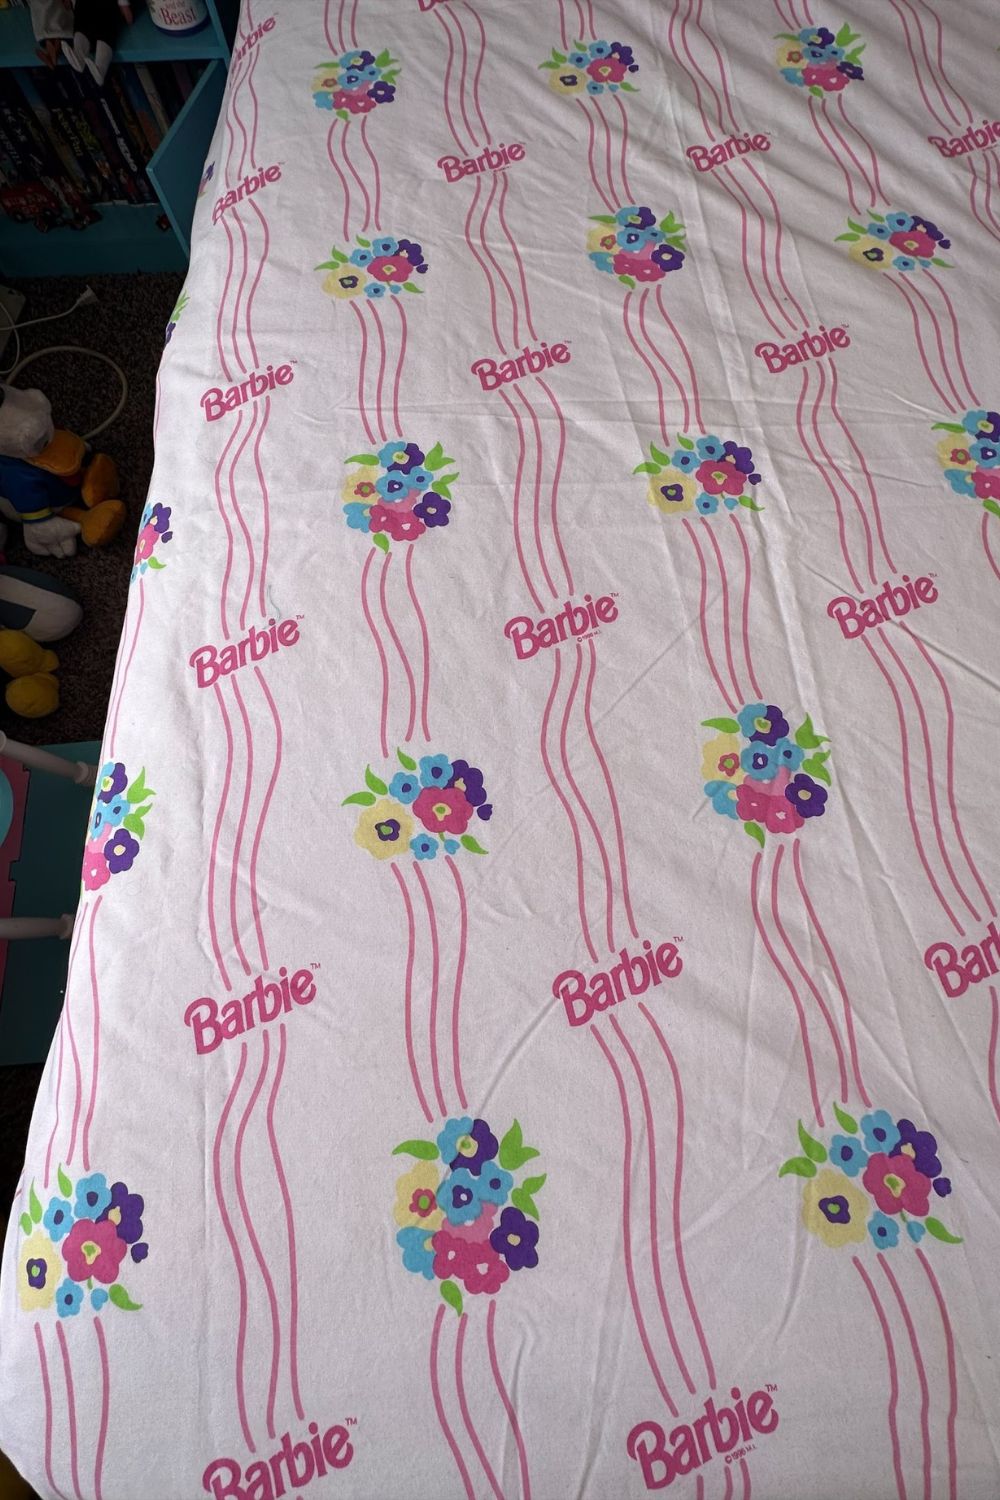 1996 VINTAGE 2 PCS BARBIE FLOWERS FULL FLAT AND FITTED BED SHEET SET*